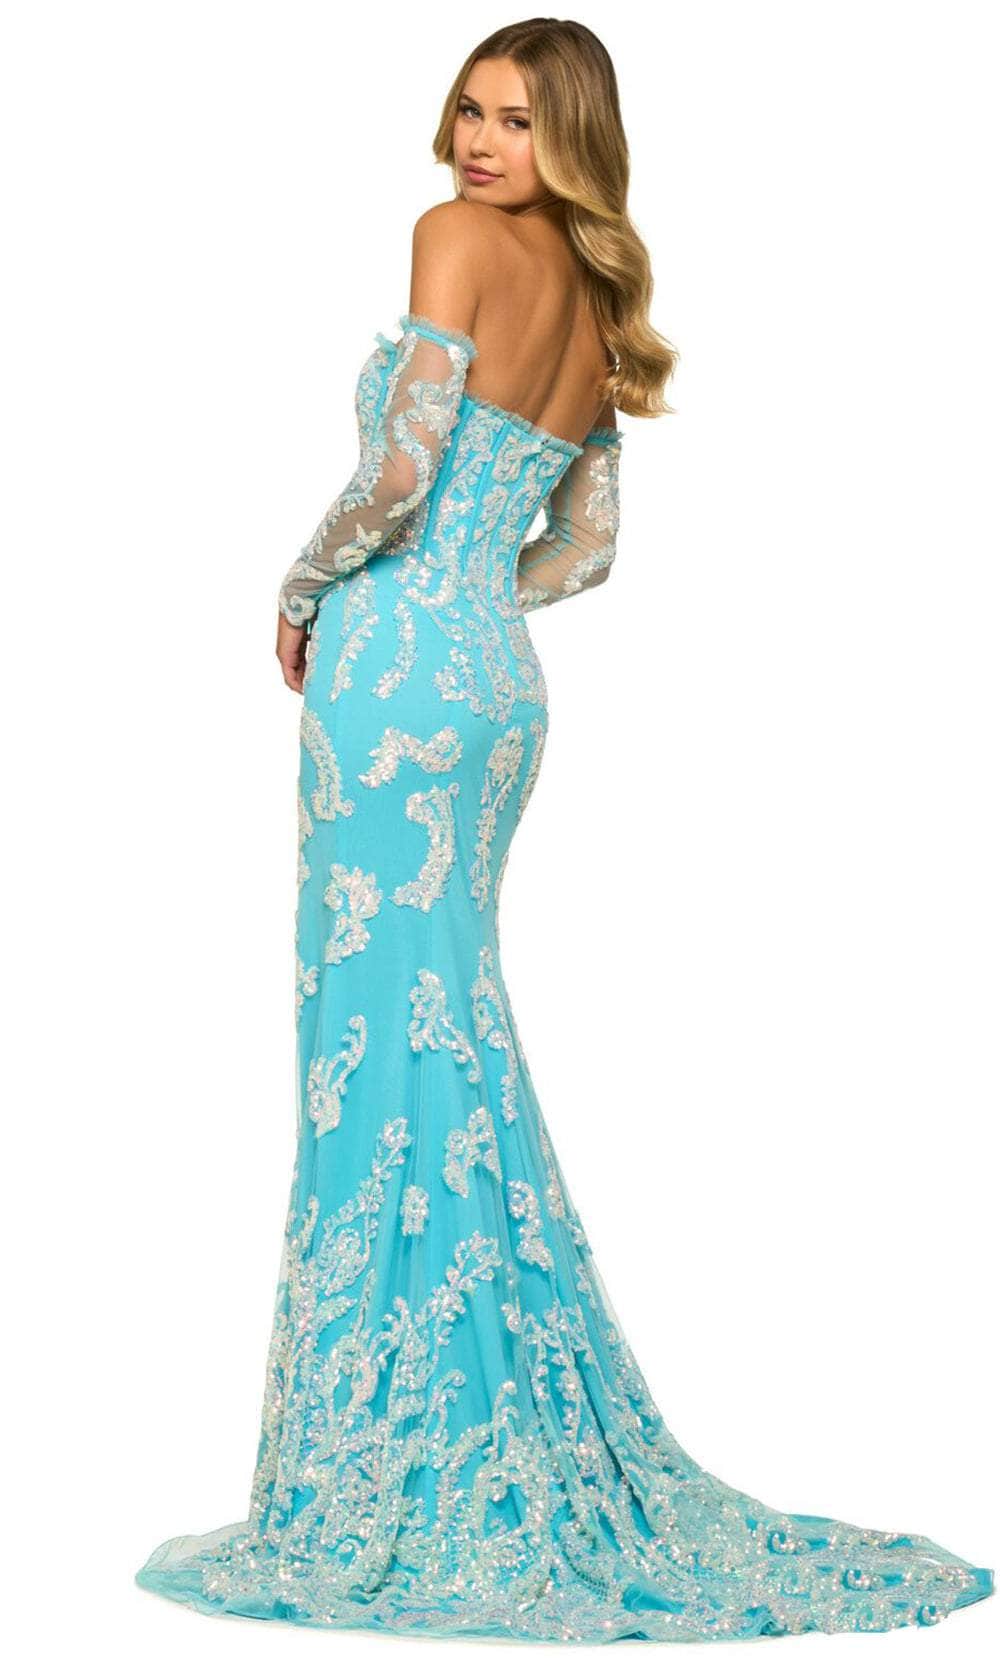 Sherri Hill 55425 - Strapless Sequin Lace Prom Gown Special Occasion Dress